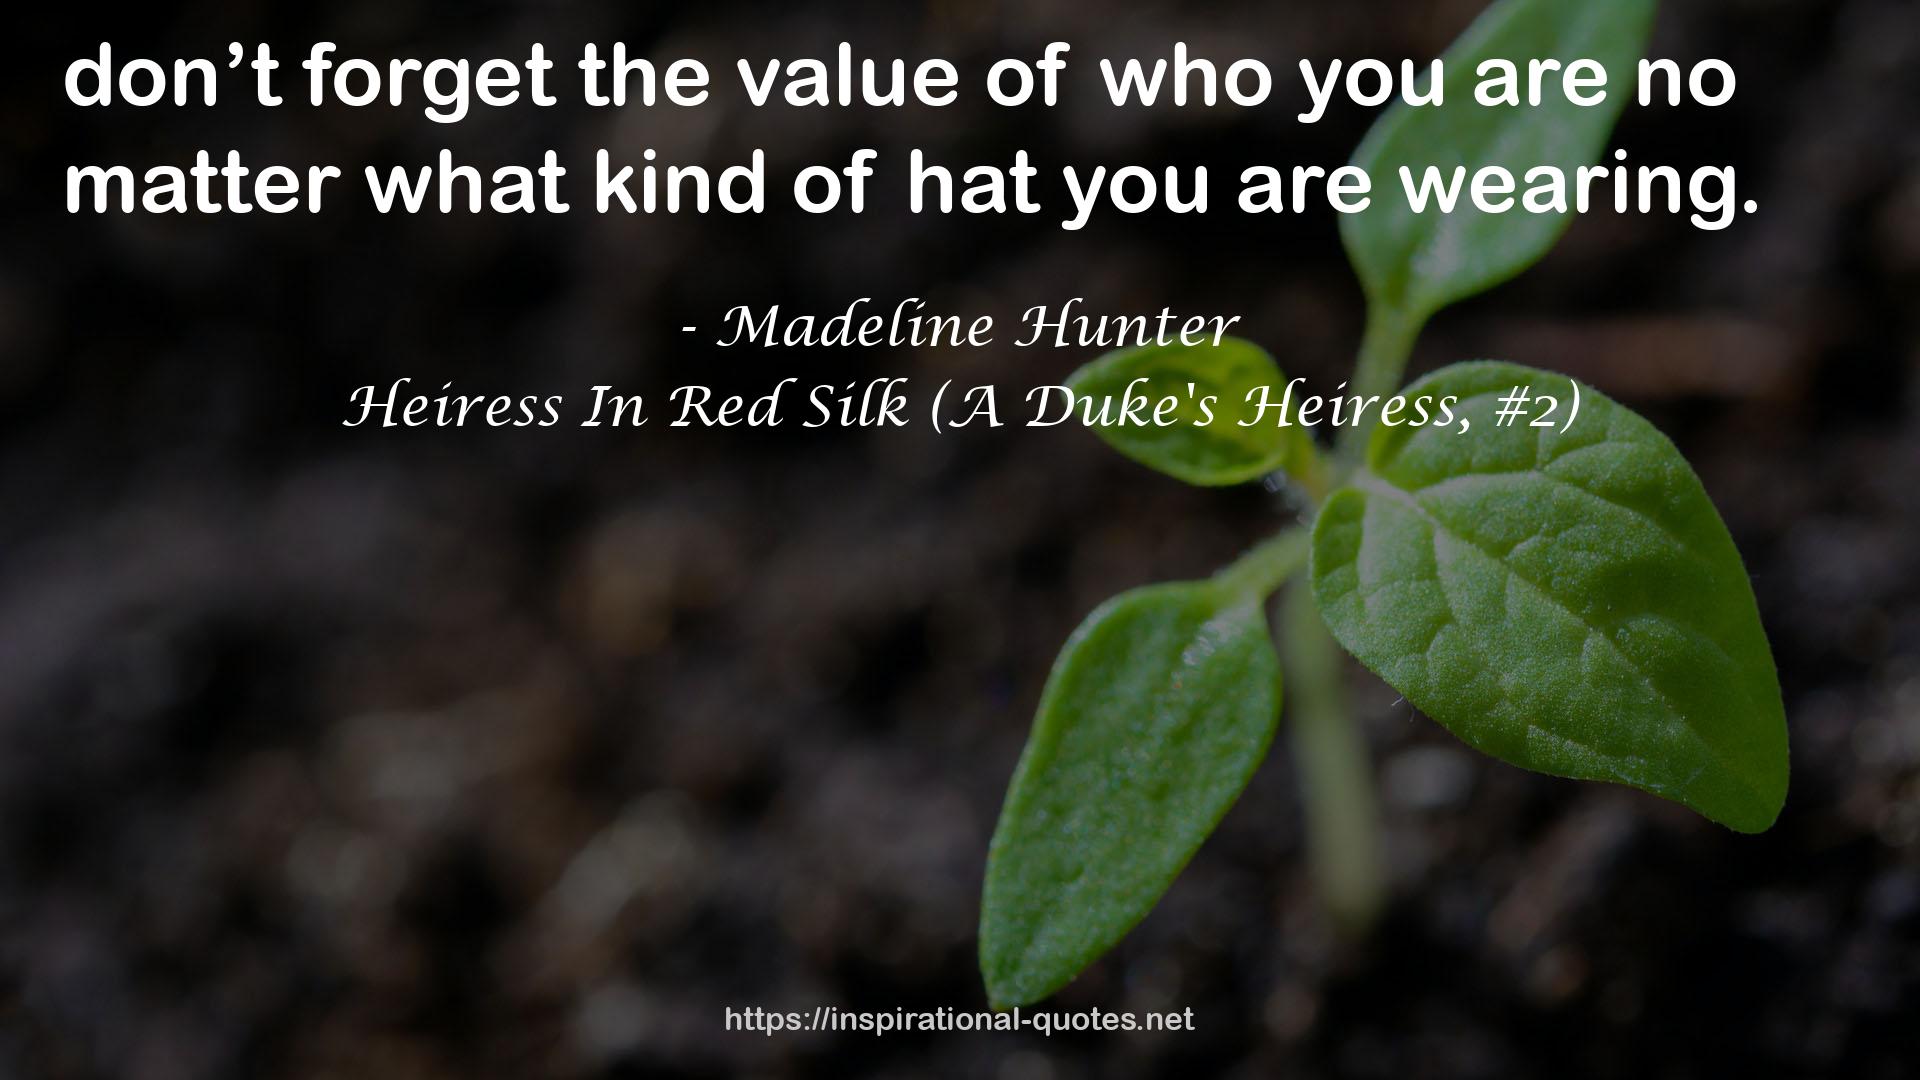 Heiress In Red Silk (A Duke's Heiress, #2) QUOTES